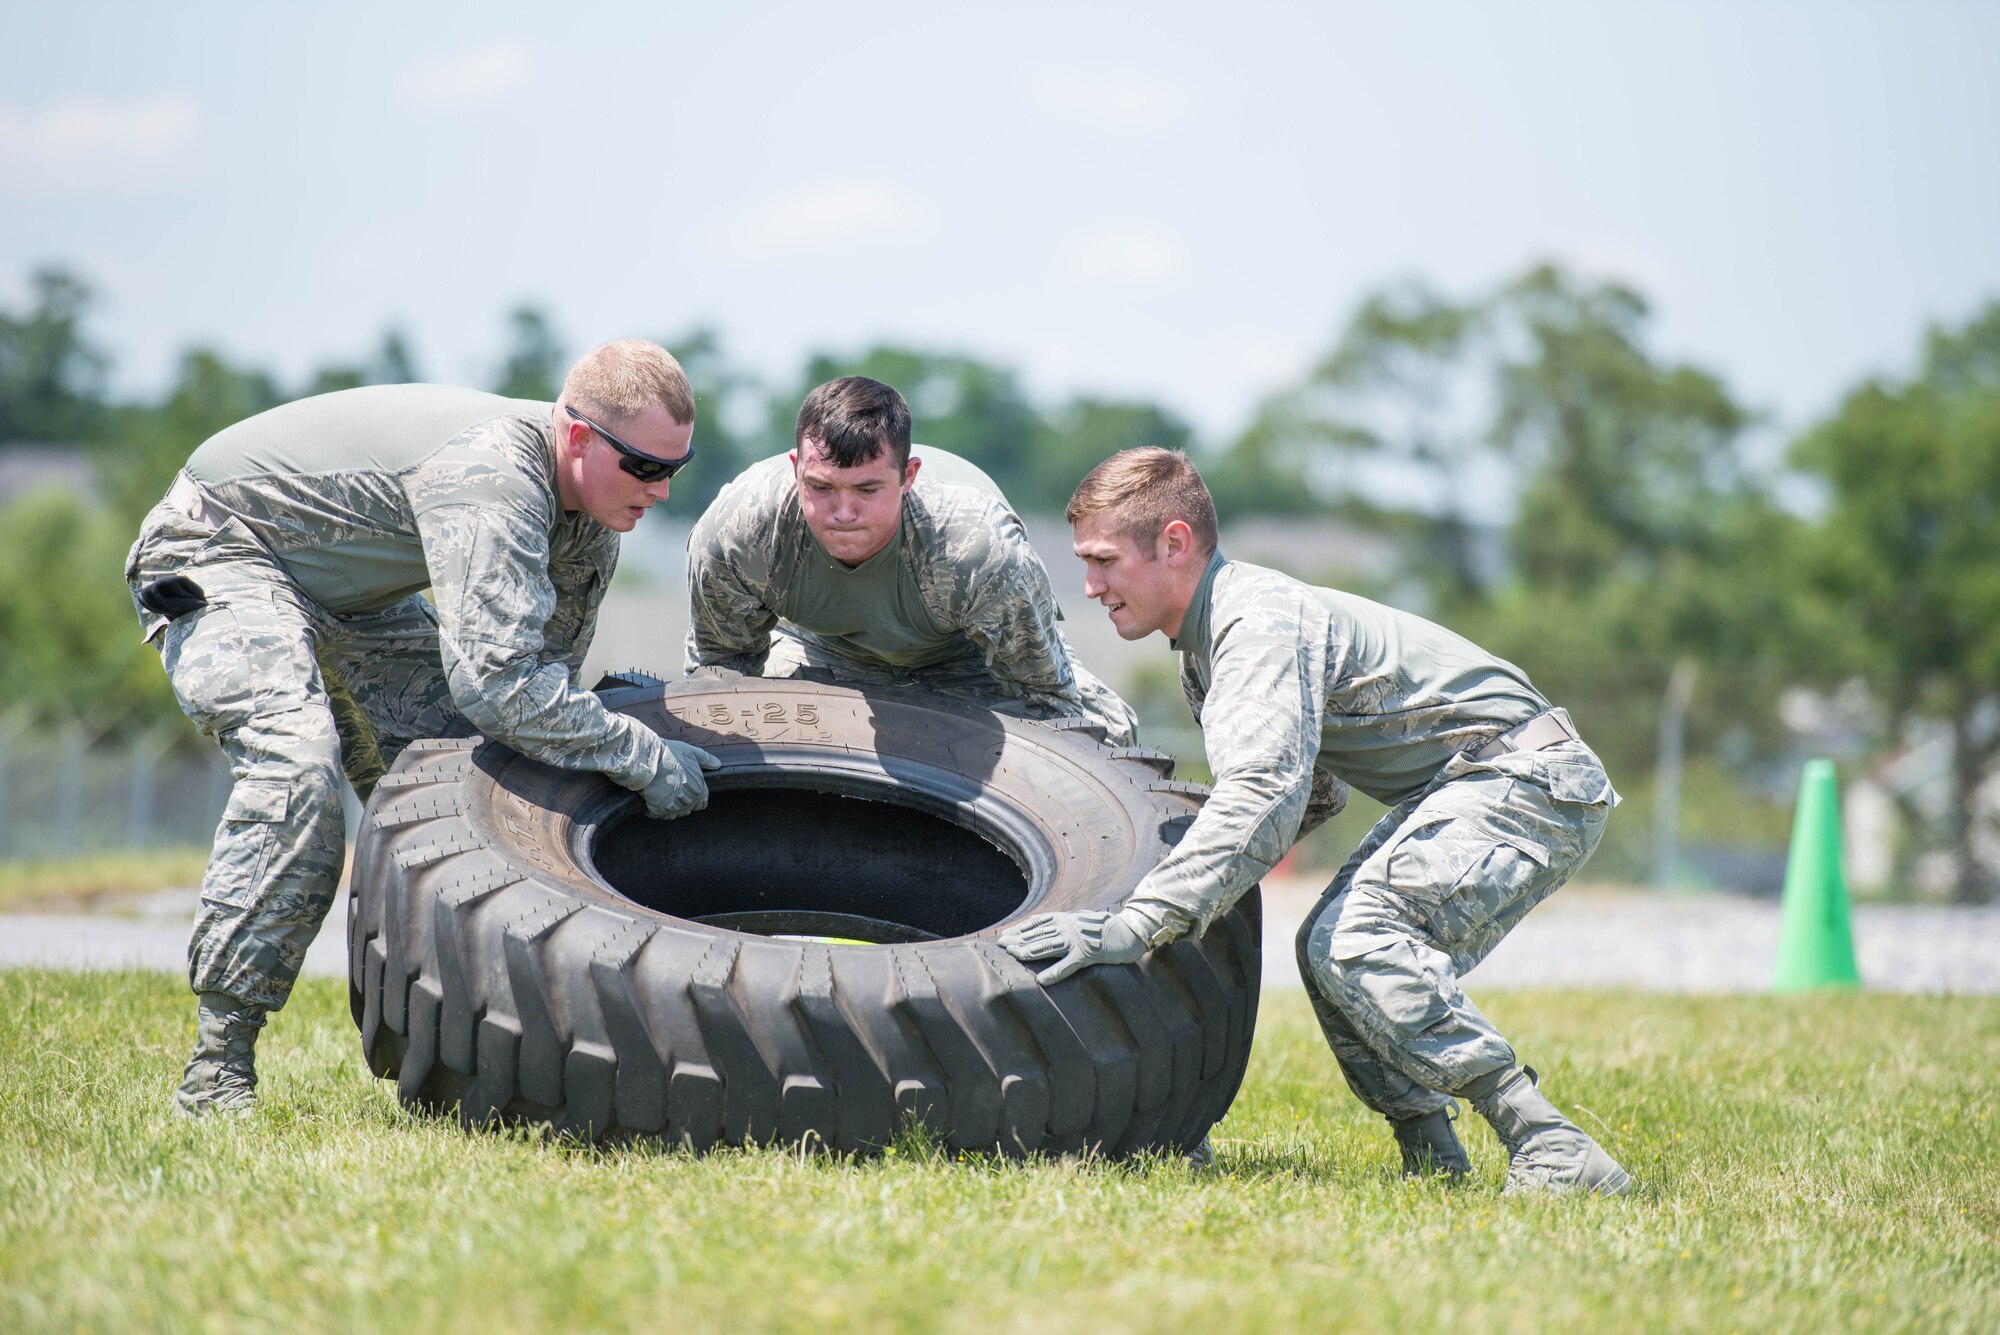 Members of security forces at the 167th Airlift Wing in Martinsburg, W.Va., Airman 1st Class Jamie Bryner (left), Airman 1st Class Jalen Newcome (middle), and Airman 1st Class Cody Kunkleman (right), lift a tire during an expeditionary fitness challenge with both strength and stamina events, June 10, 2017. The course consisted of seven stations, where teams of five, moved as a unit from location to location and were scored by station and overall time. (U.S. Air National Guard photo by Staff Sgt. Jodie Witmer)